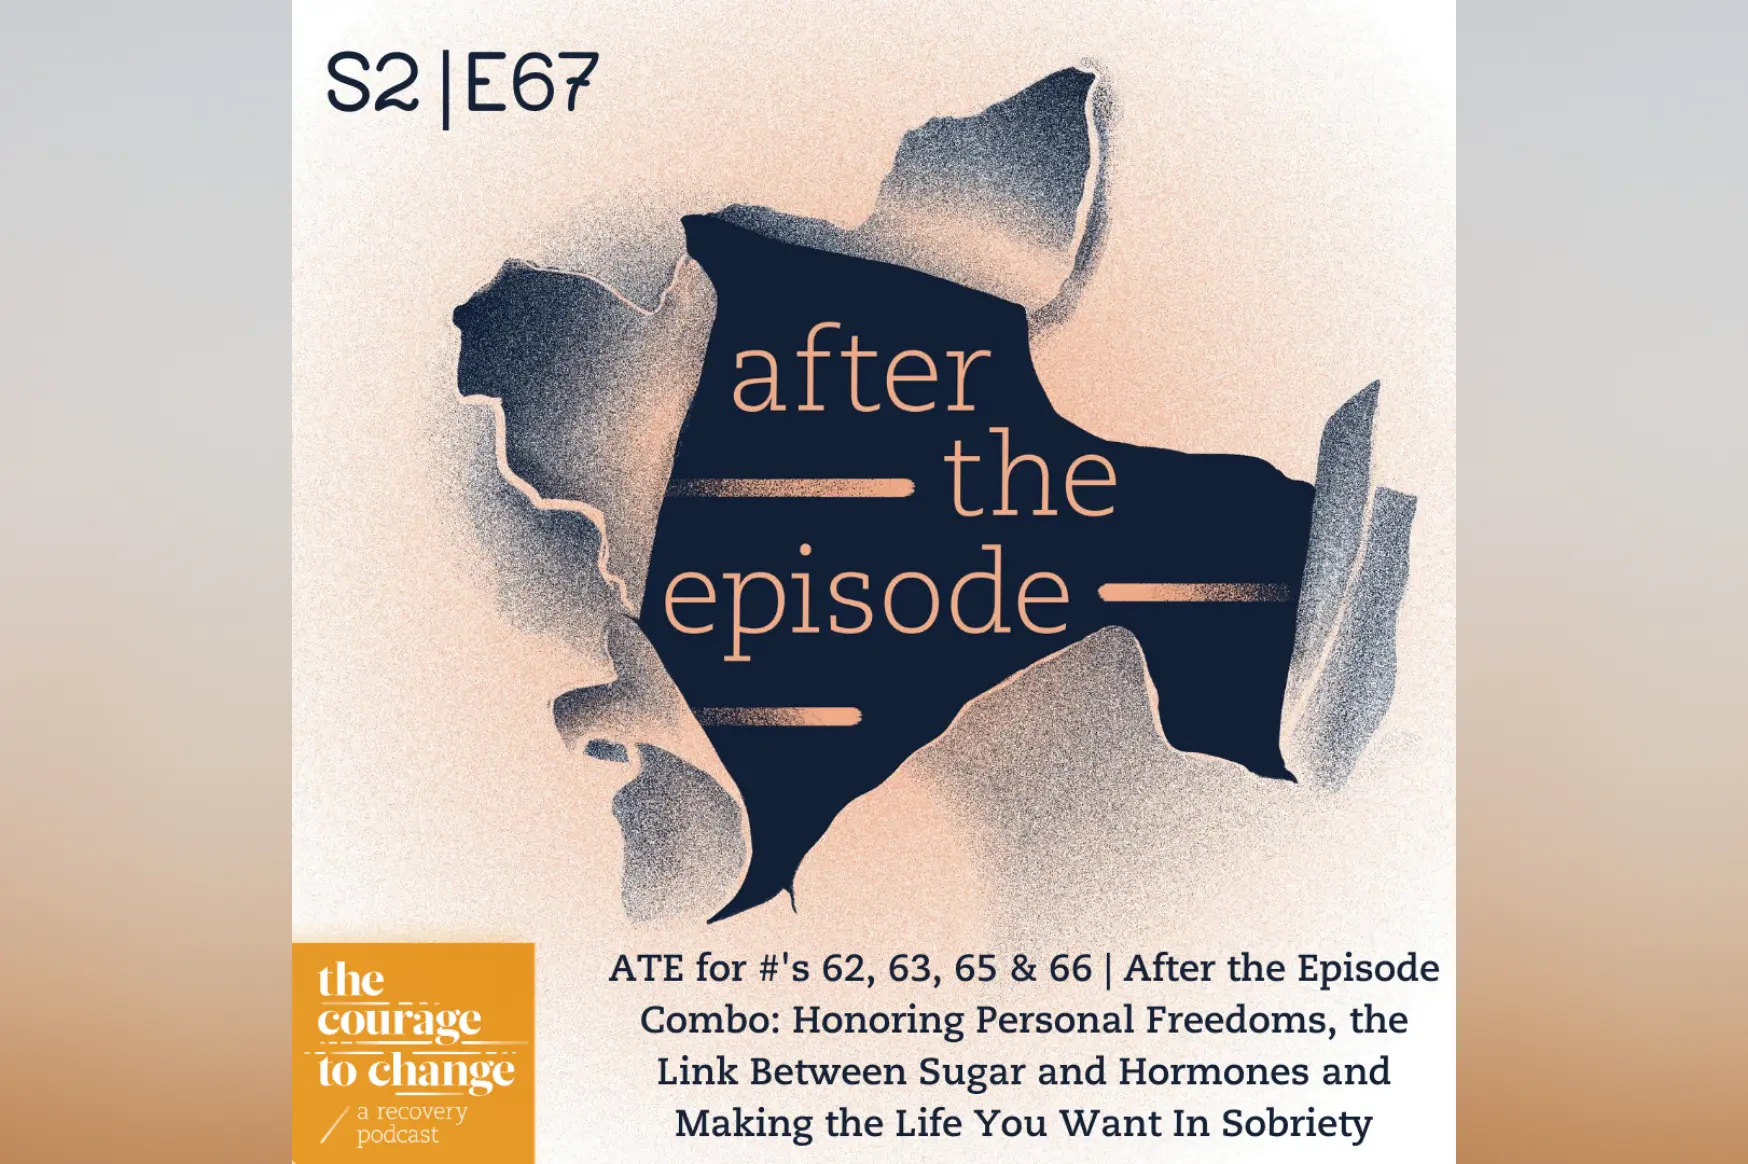 #67 - After the Episode